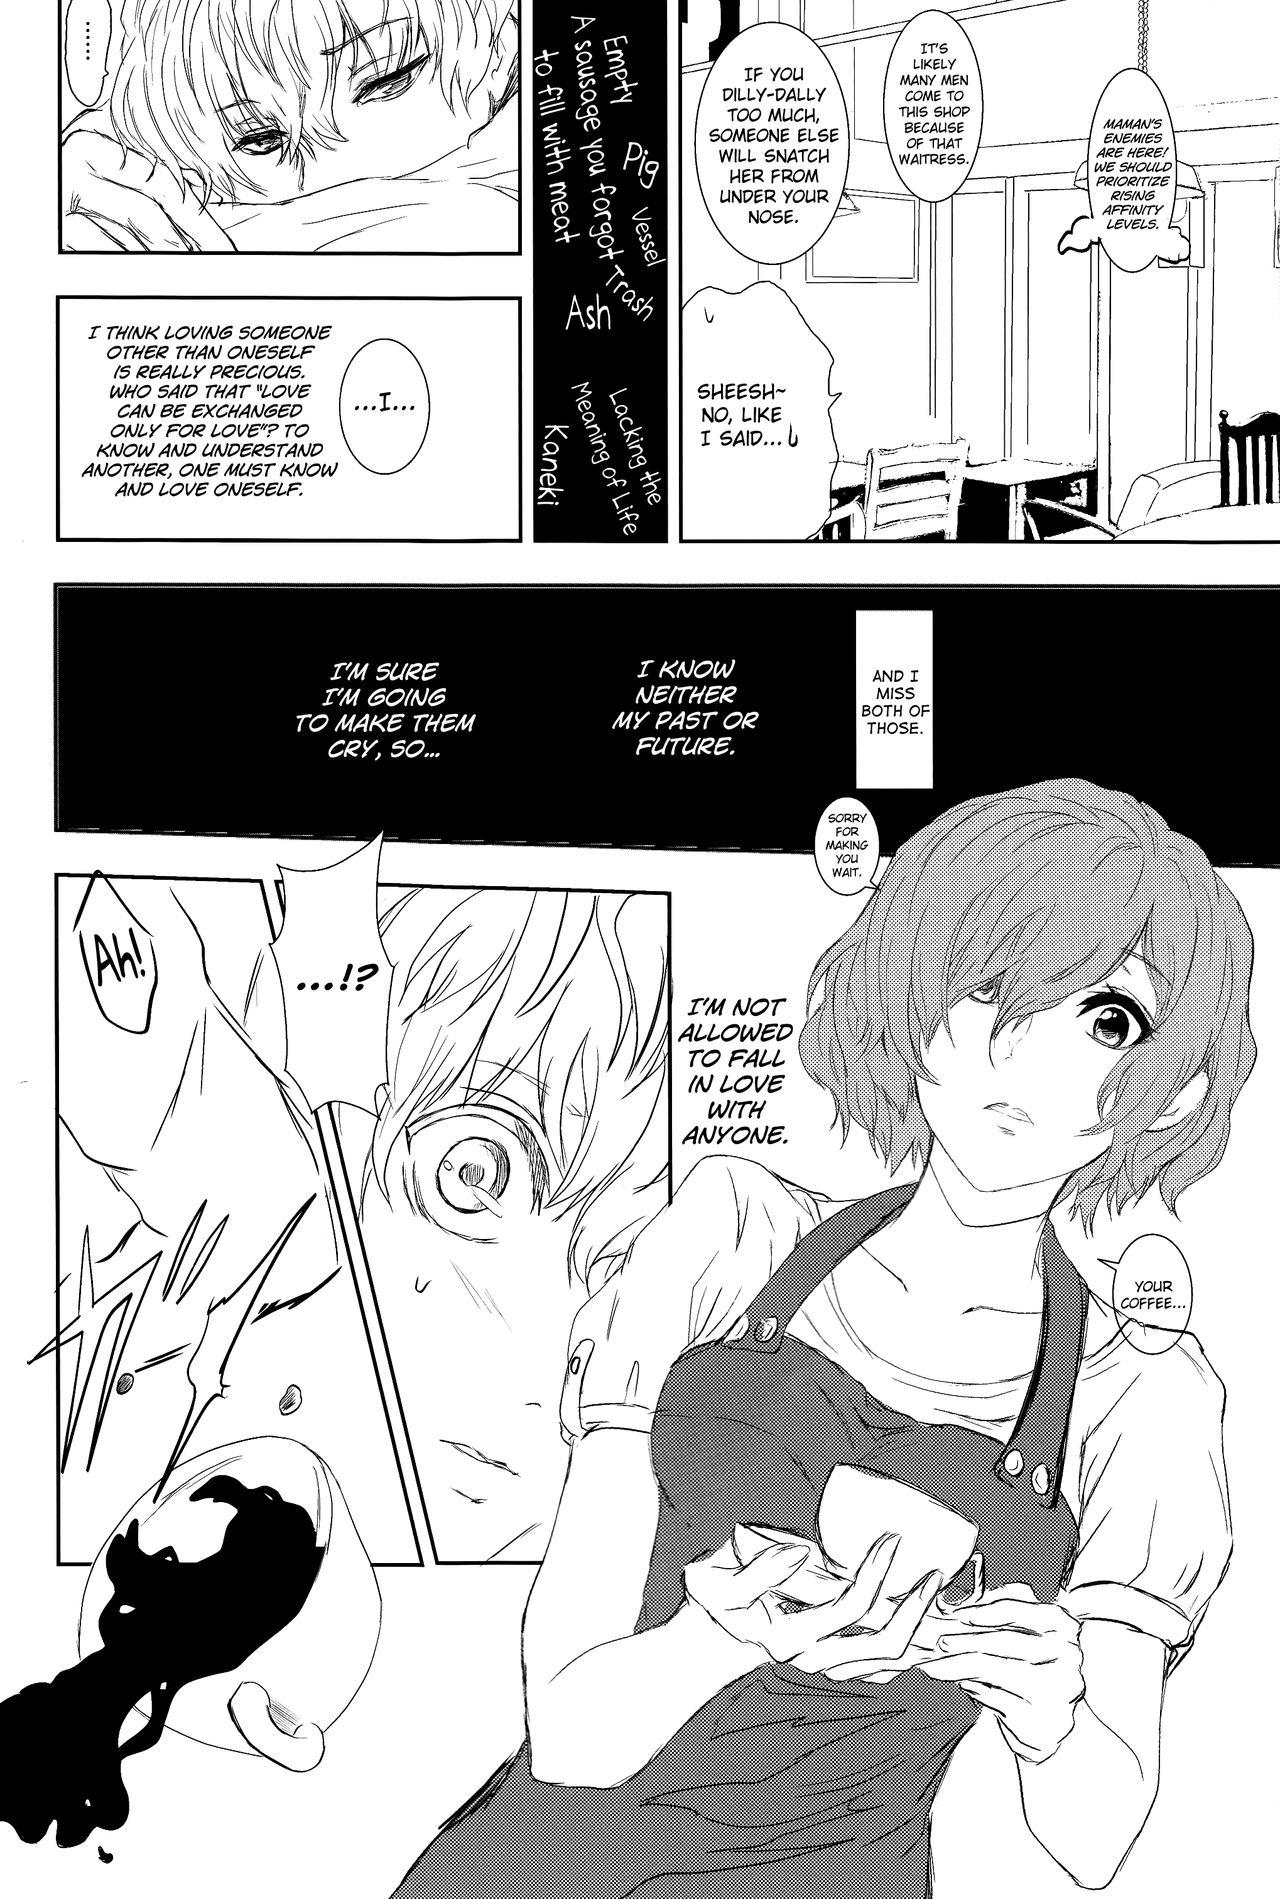 Glamour Innocent Blue - Before Sunrise - Tokyo ghoul Red - Page 8